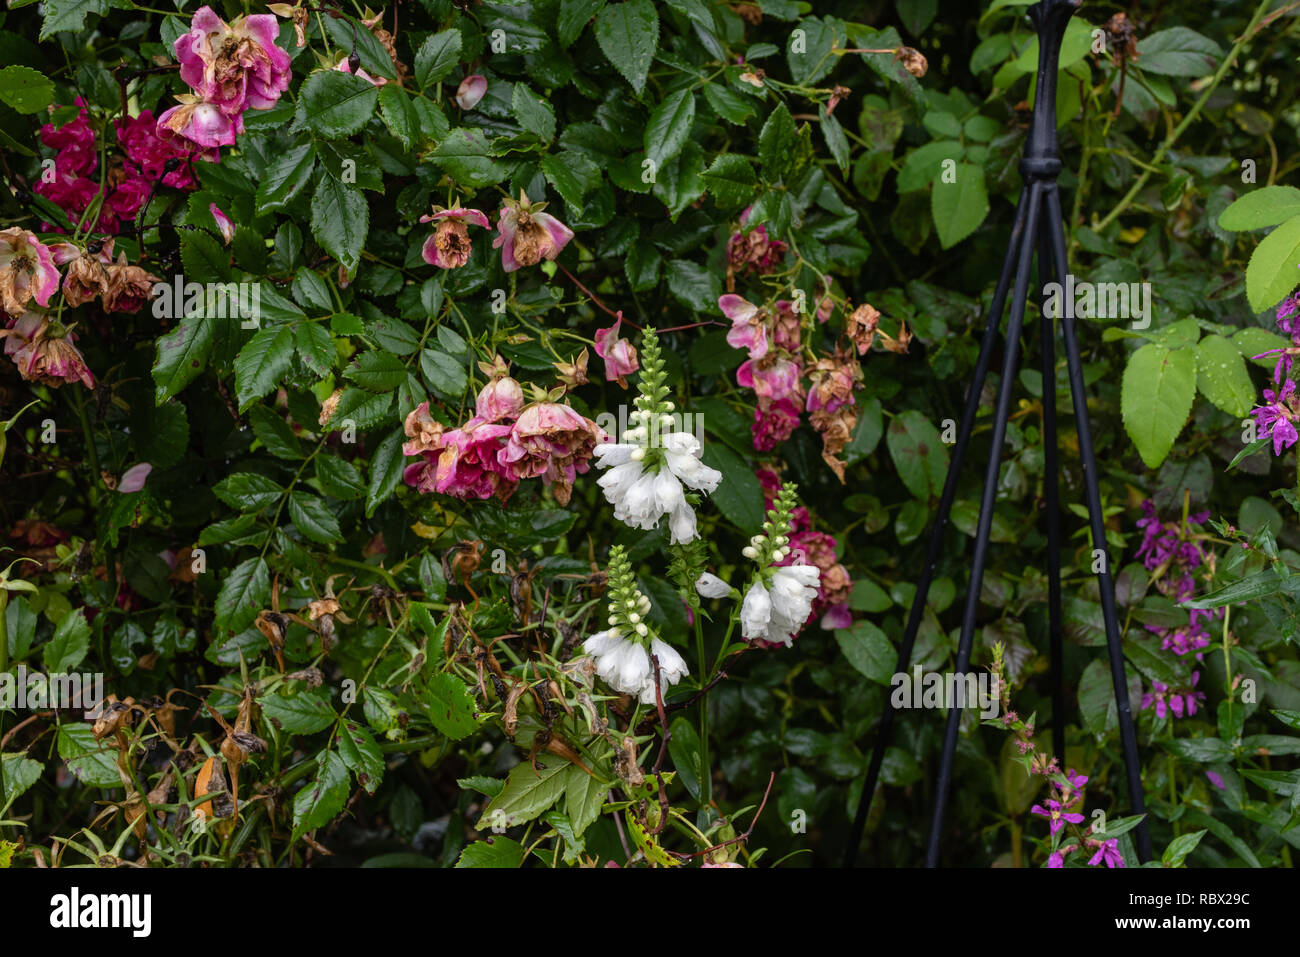 Colorful outdoor image of three blossoms of a green white false  dragonhead/obedient/obedience plant in front of a rose hedge with fading flowers Stock Photo